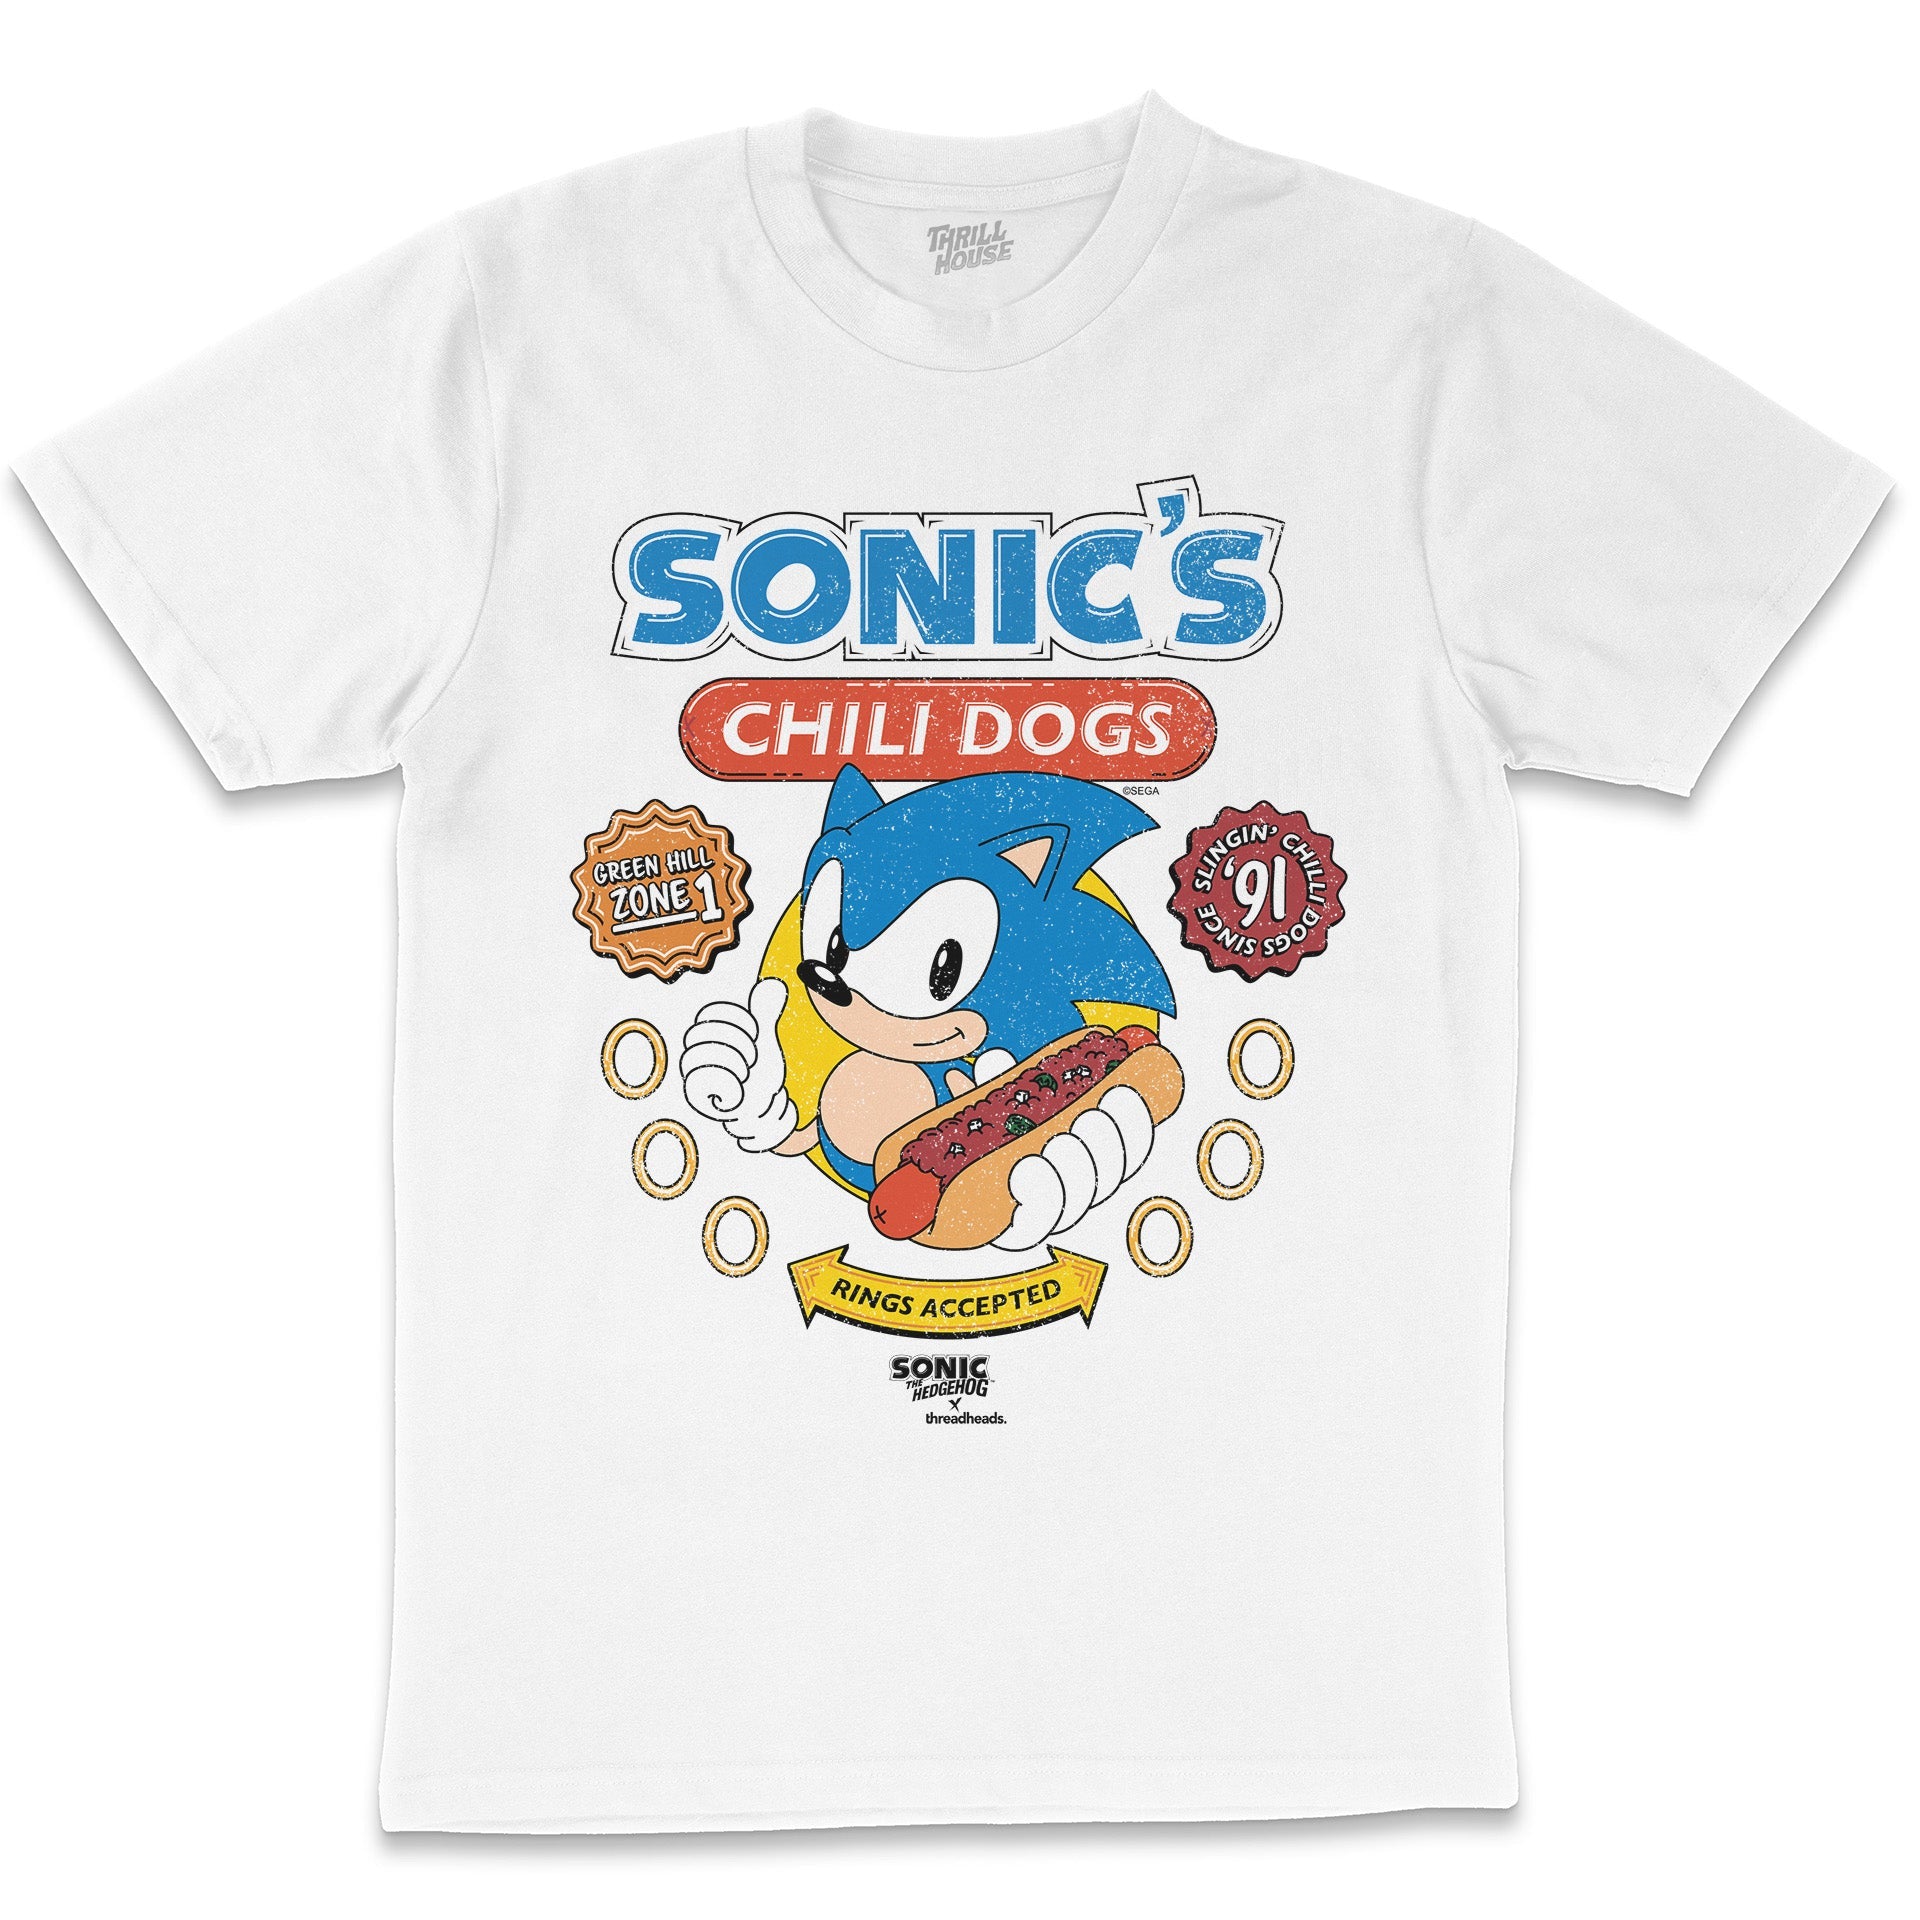 Sonic The Hedgehog Chili Dogs Retro 90s Video Game Cartridge Console Officially Licensed SEGA T-Shirt